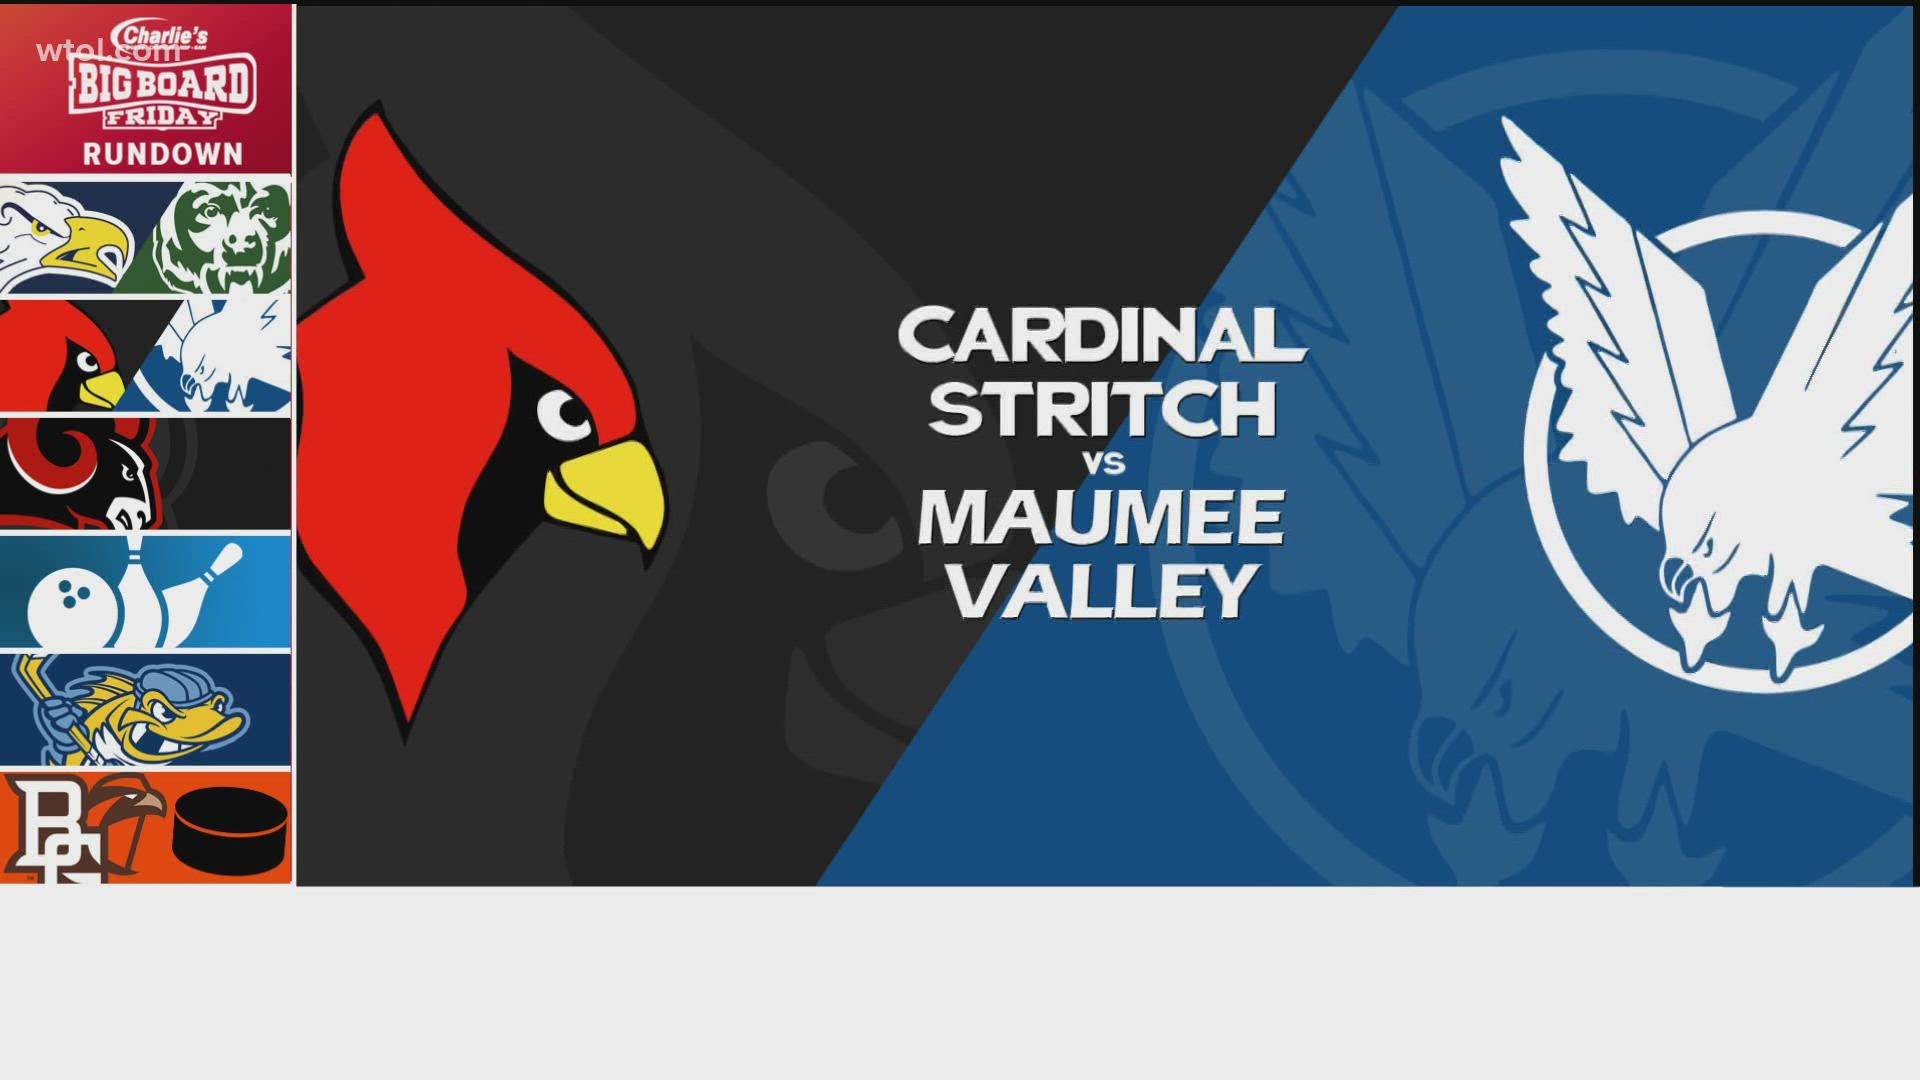 To the TAAC now. Maumee Valley going on the road to take on Cardinal Stritch.